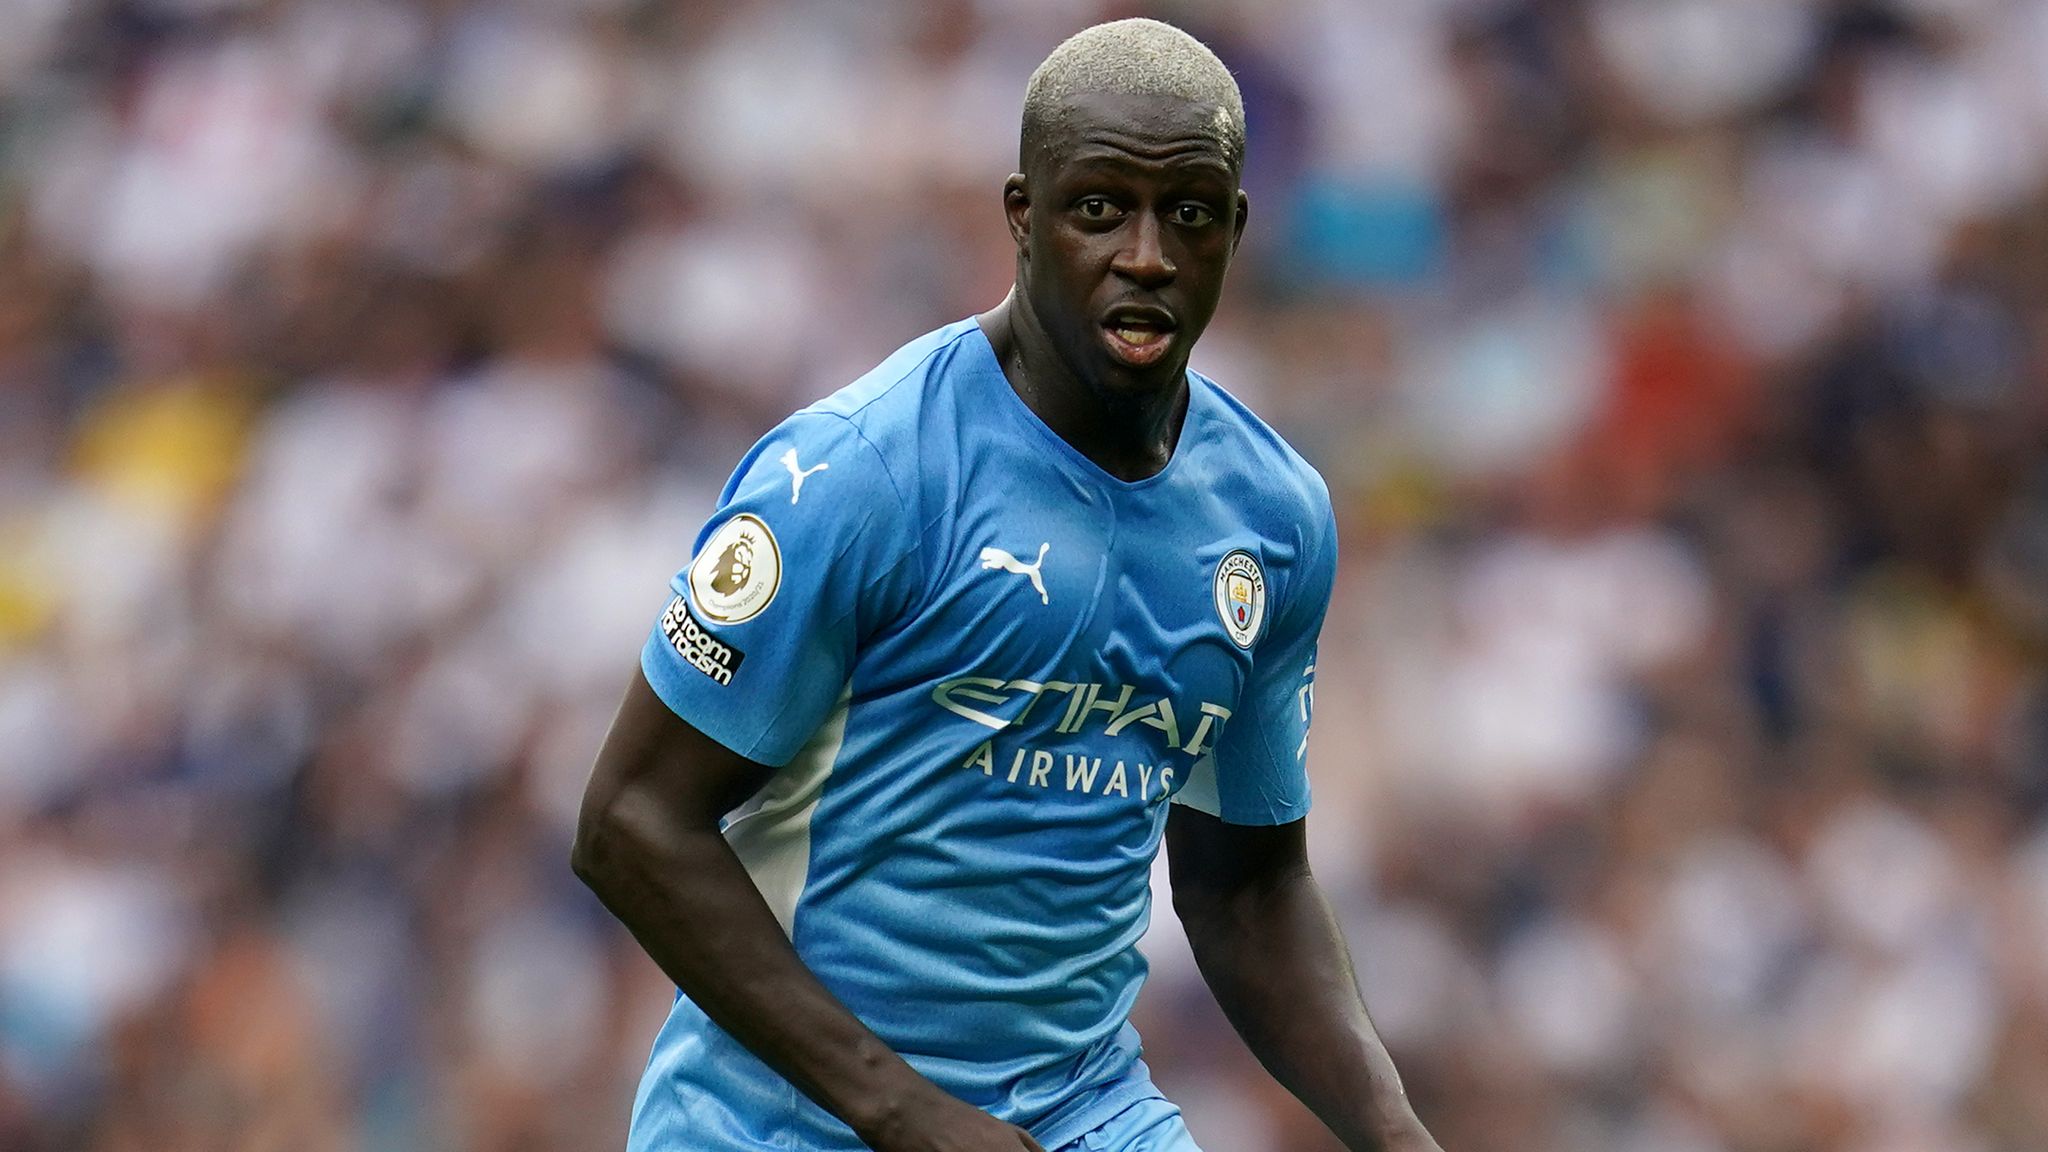 Man City's Mendy cleared of rape charge but trial continues for 7 others